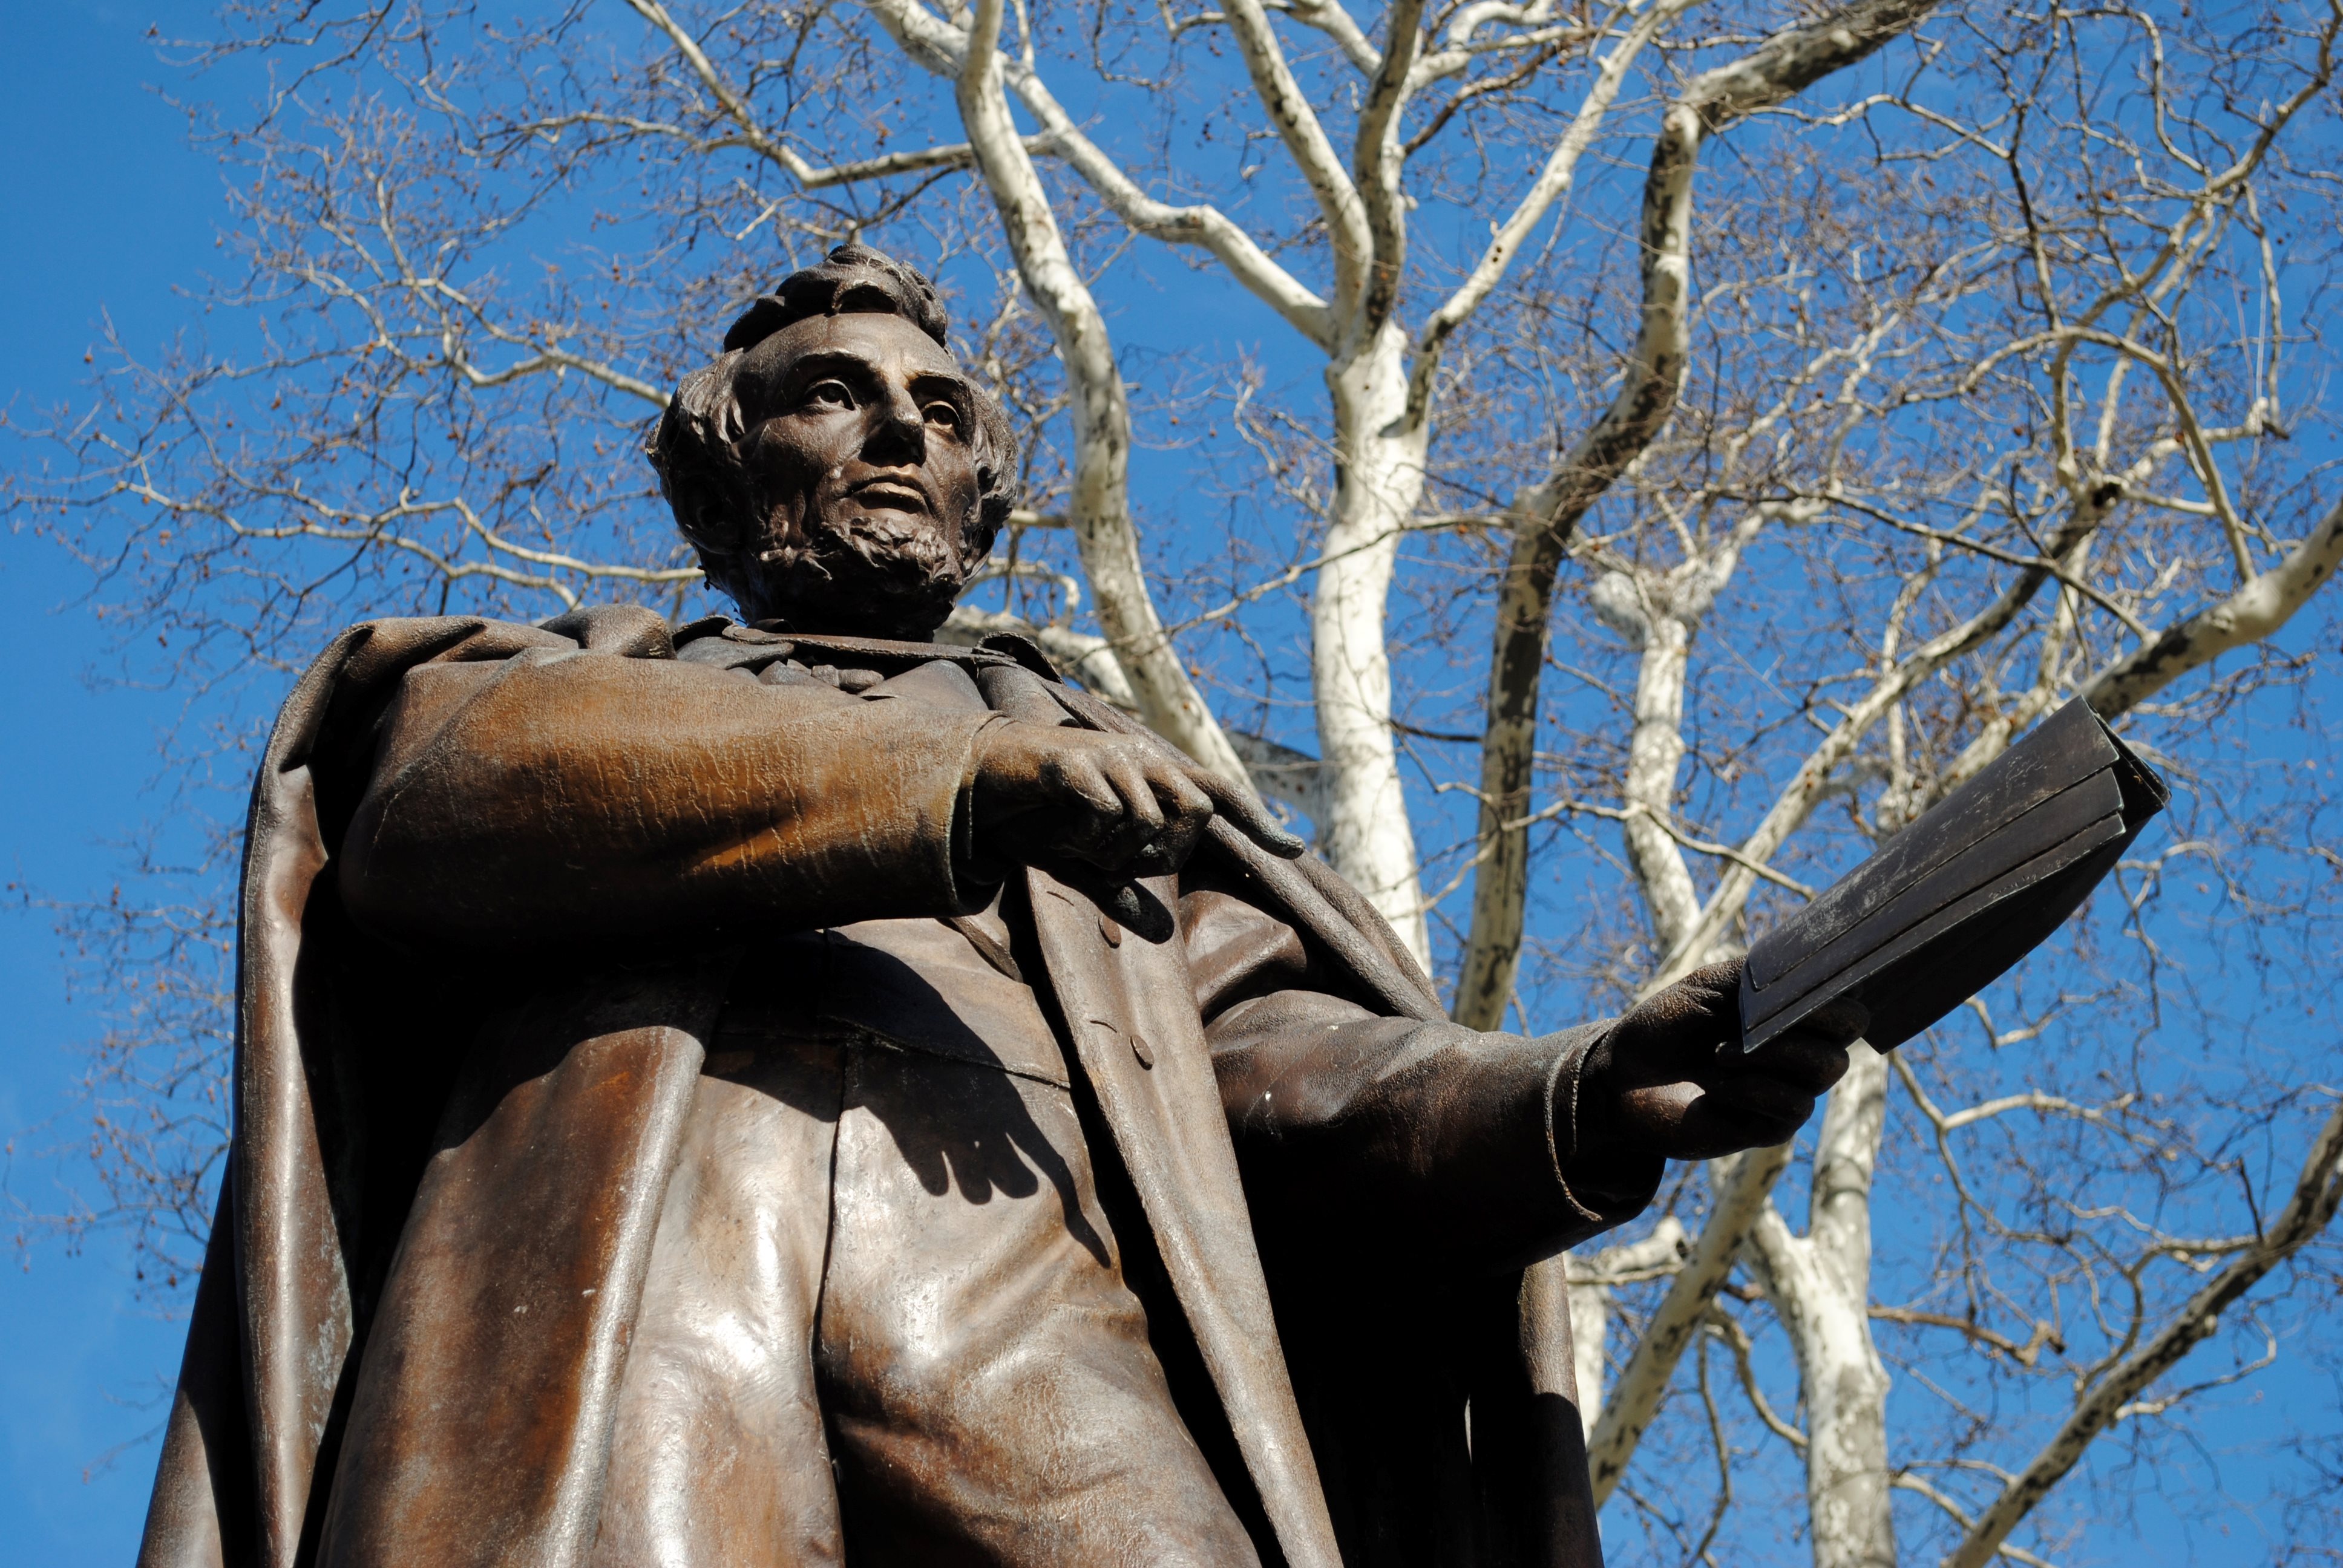 Statue of Honest Abe in Brooklyn